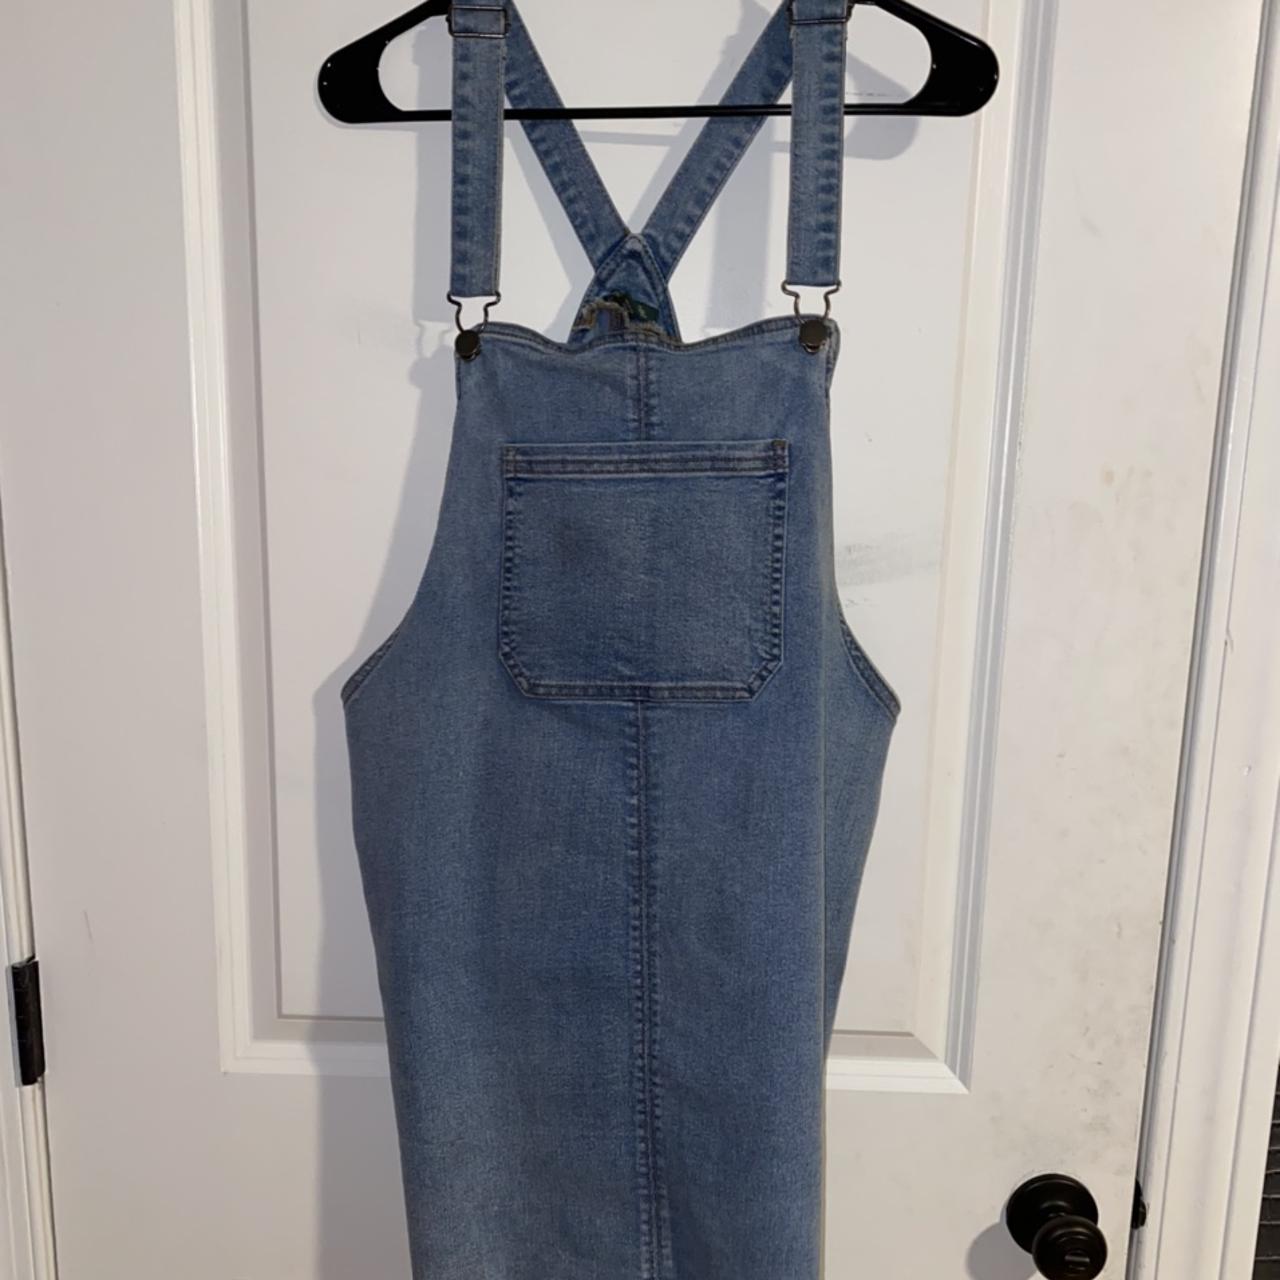 Wild fable overall dress with a frayed edge at the... - Depop